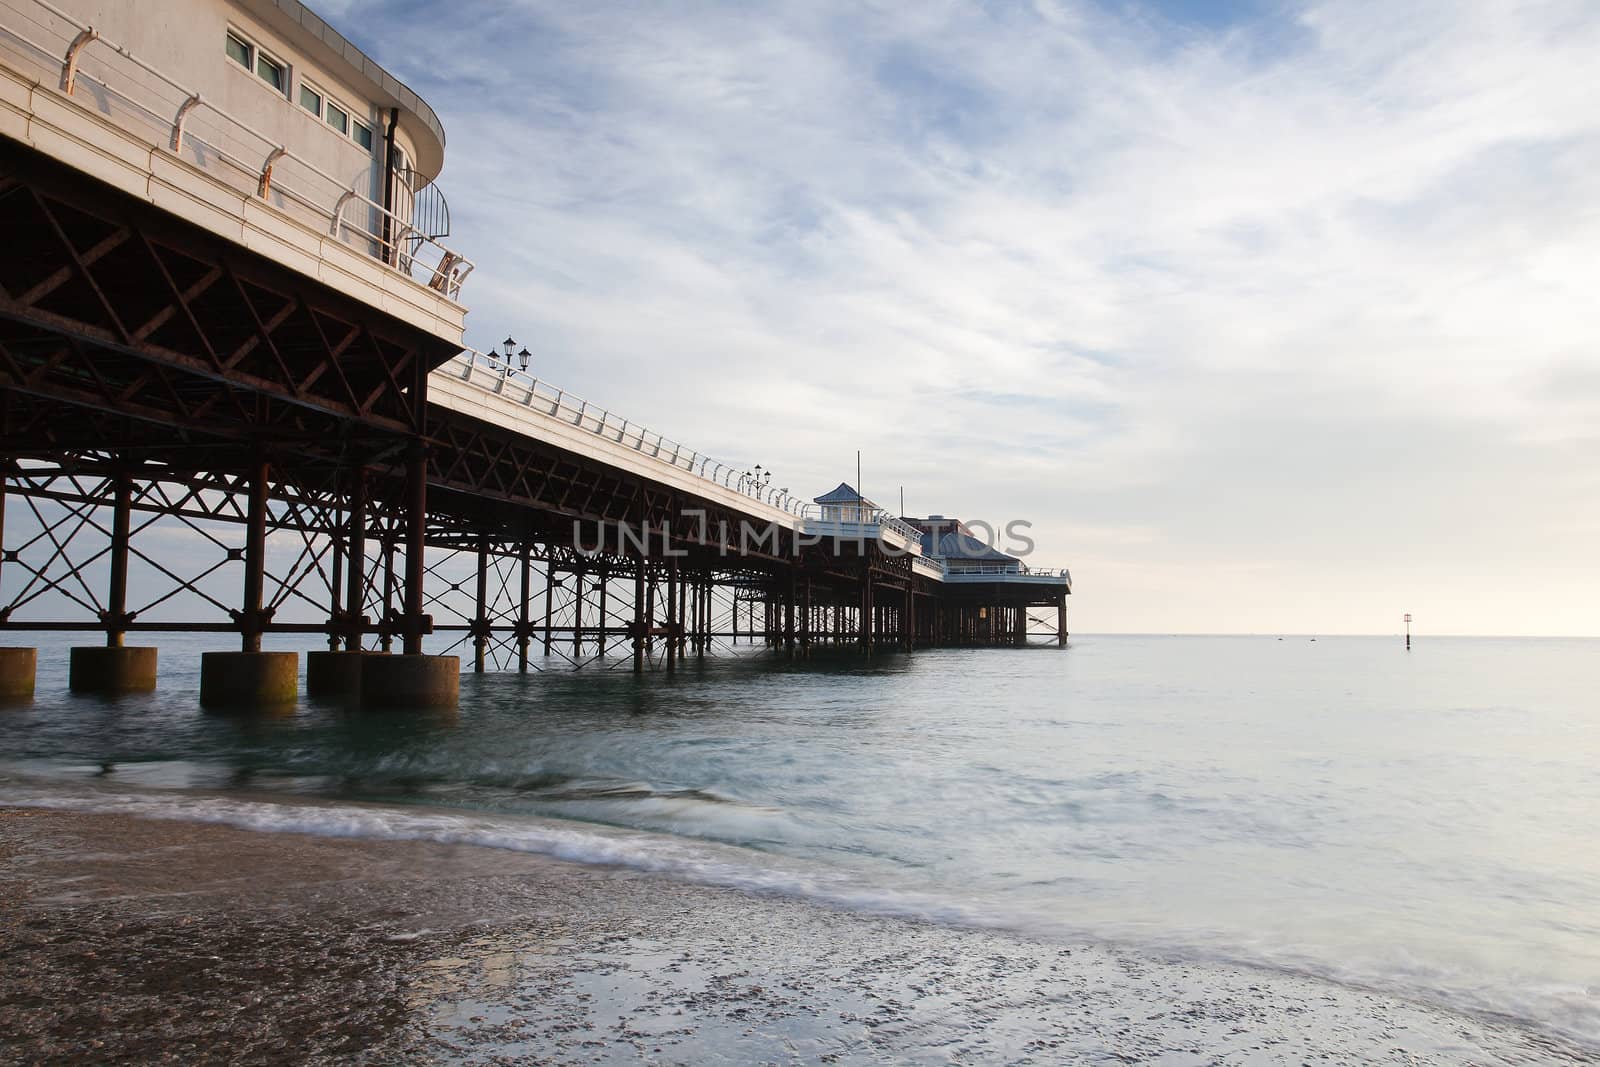 A view of Cromer Pier from the beach